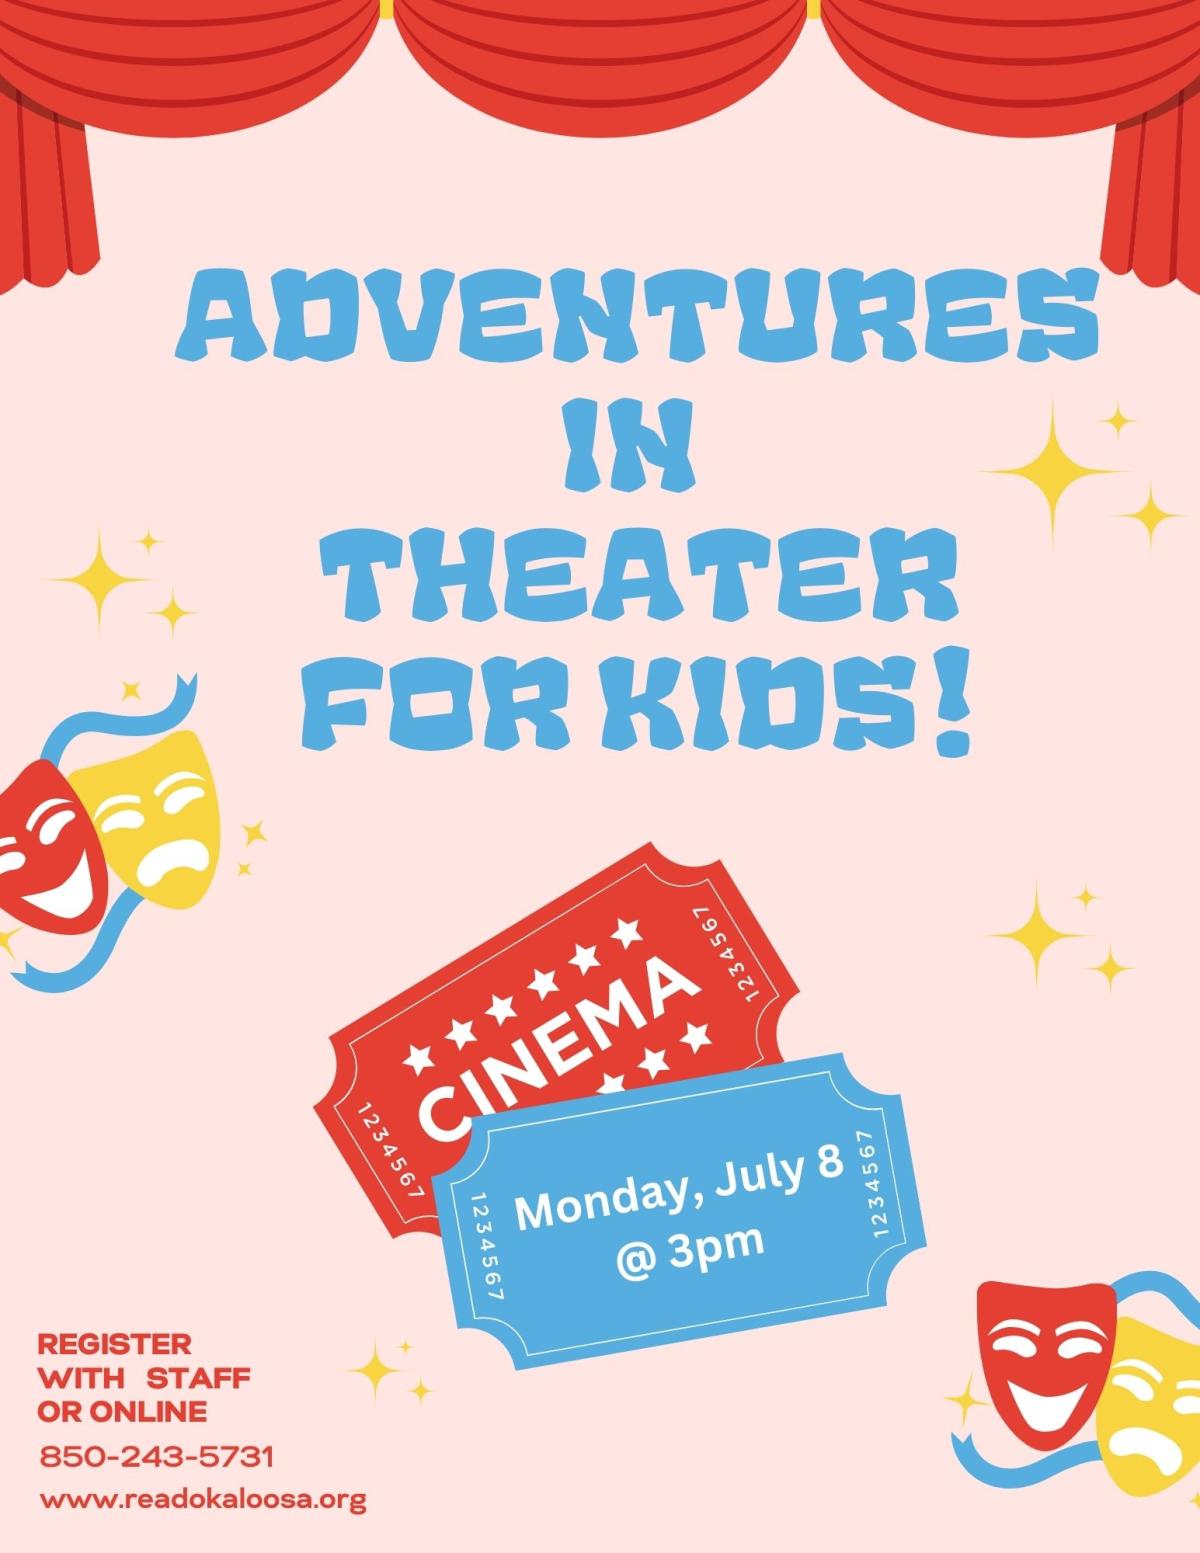 adventures in theater monday july 8 @ 3pm